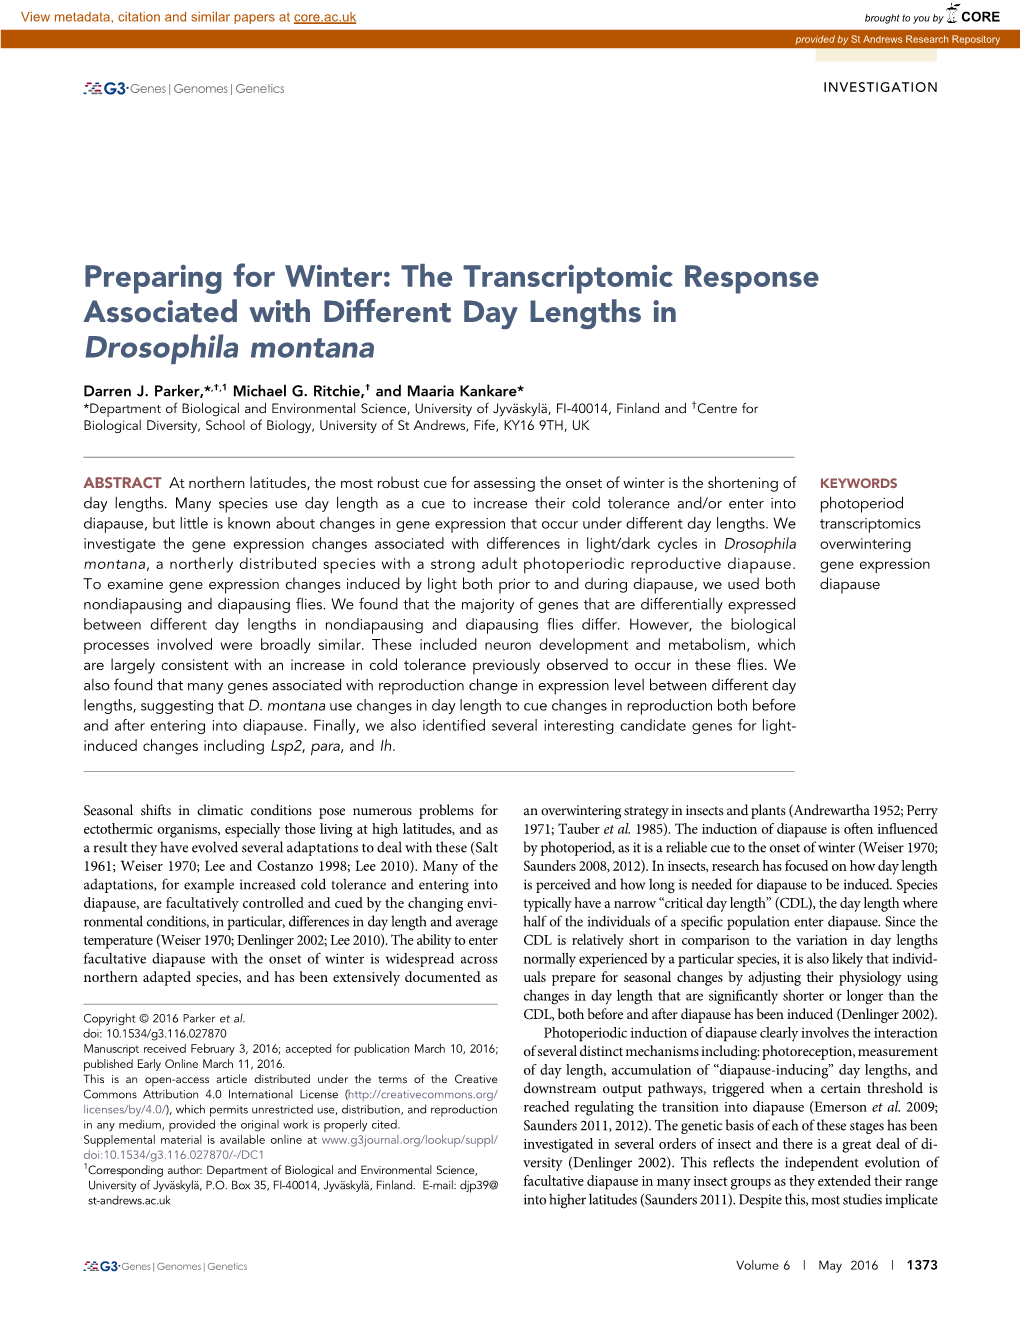 The Transcriptomic Response Associated with Different Day Lengths in Drosophila Montana